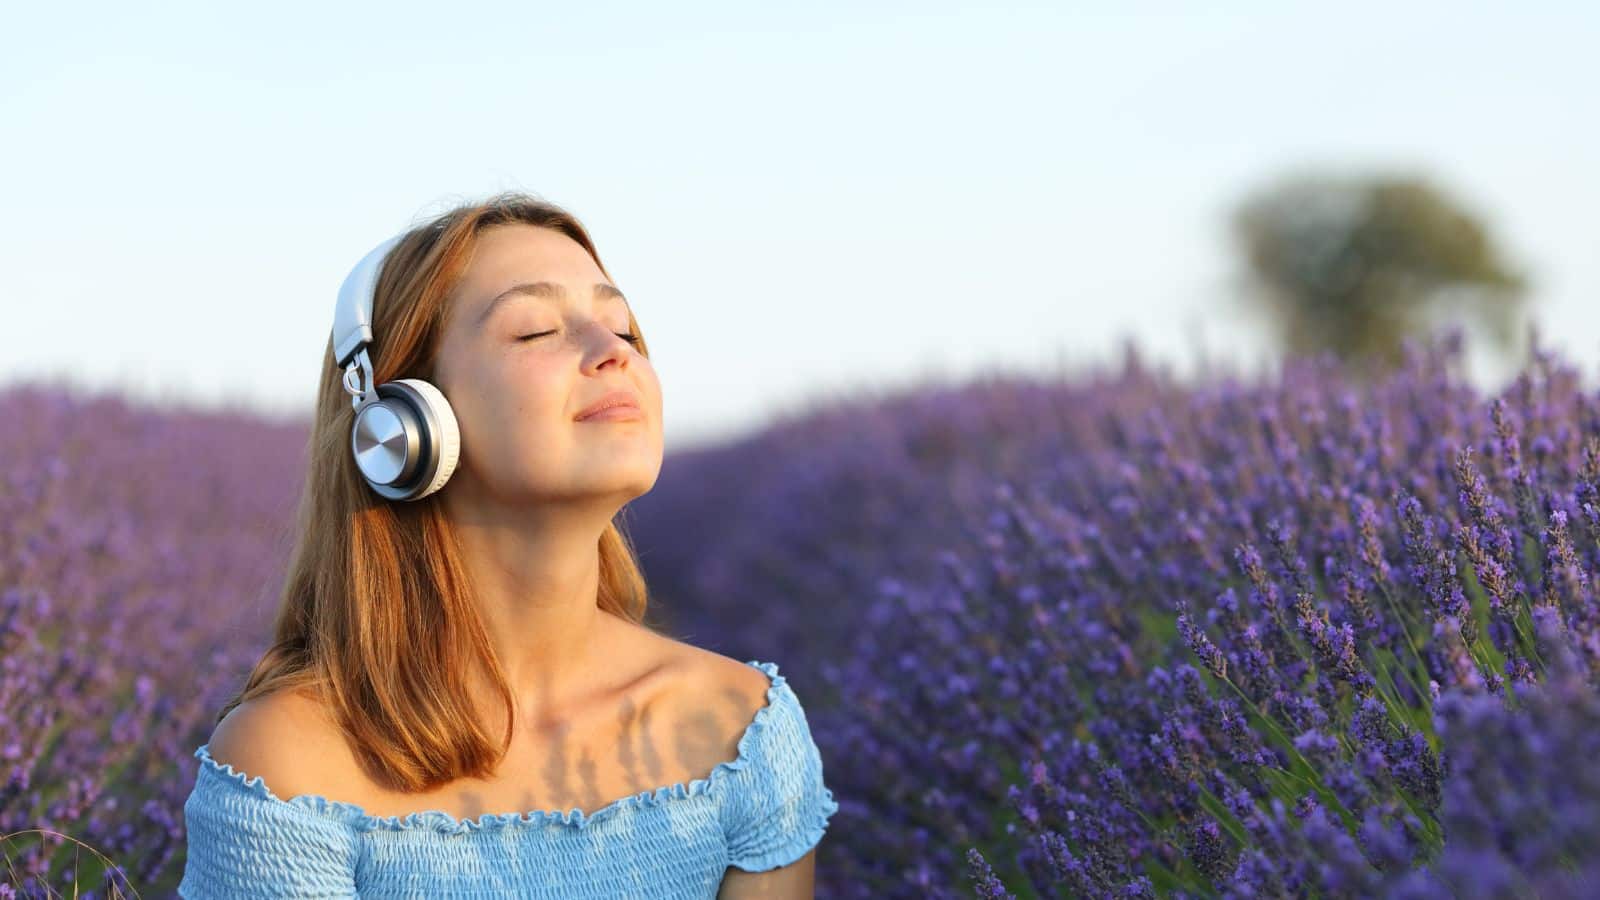 <p>You can try music therapy to help you relax and refocus your thoughts. Create a playlist of songs that help you relax. You don’t have to stick to classical or instrumental music only; any genre that works for you is fine.</p>